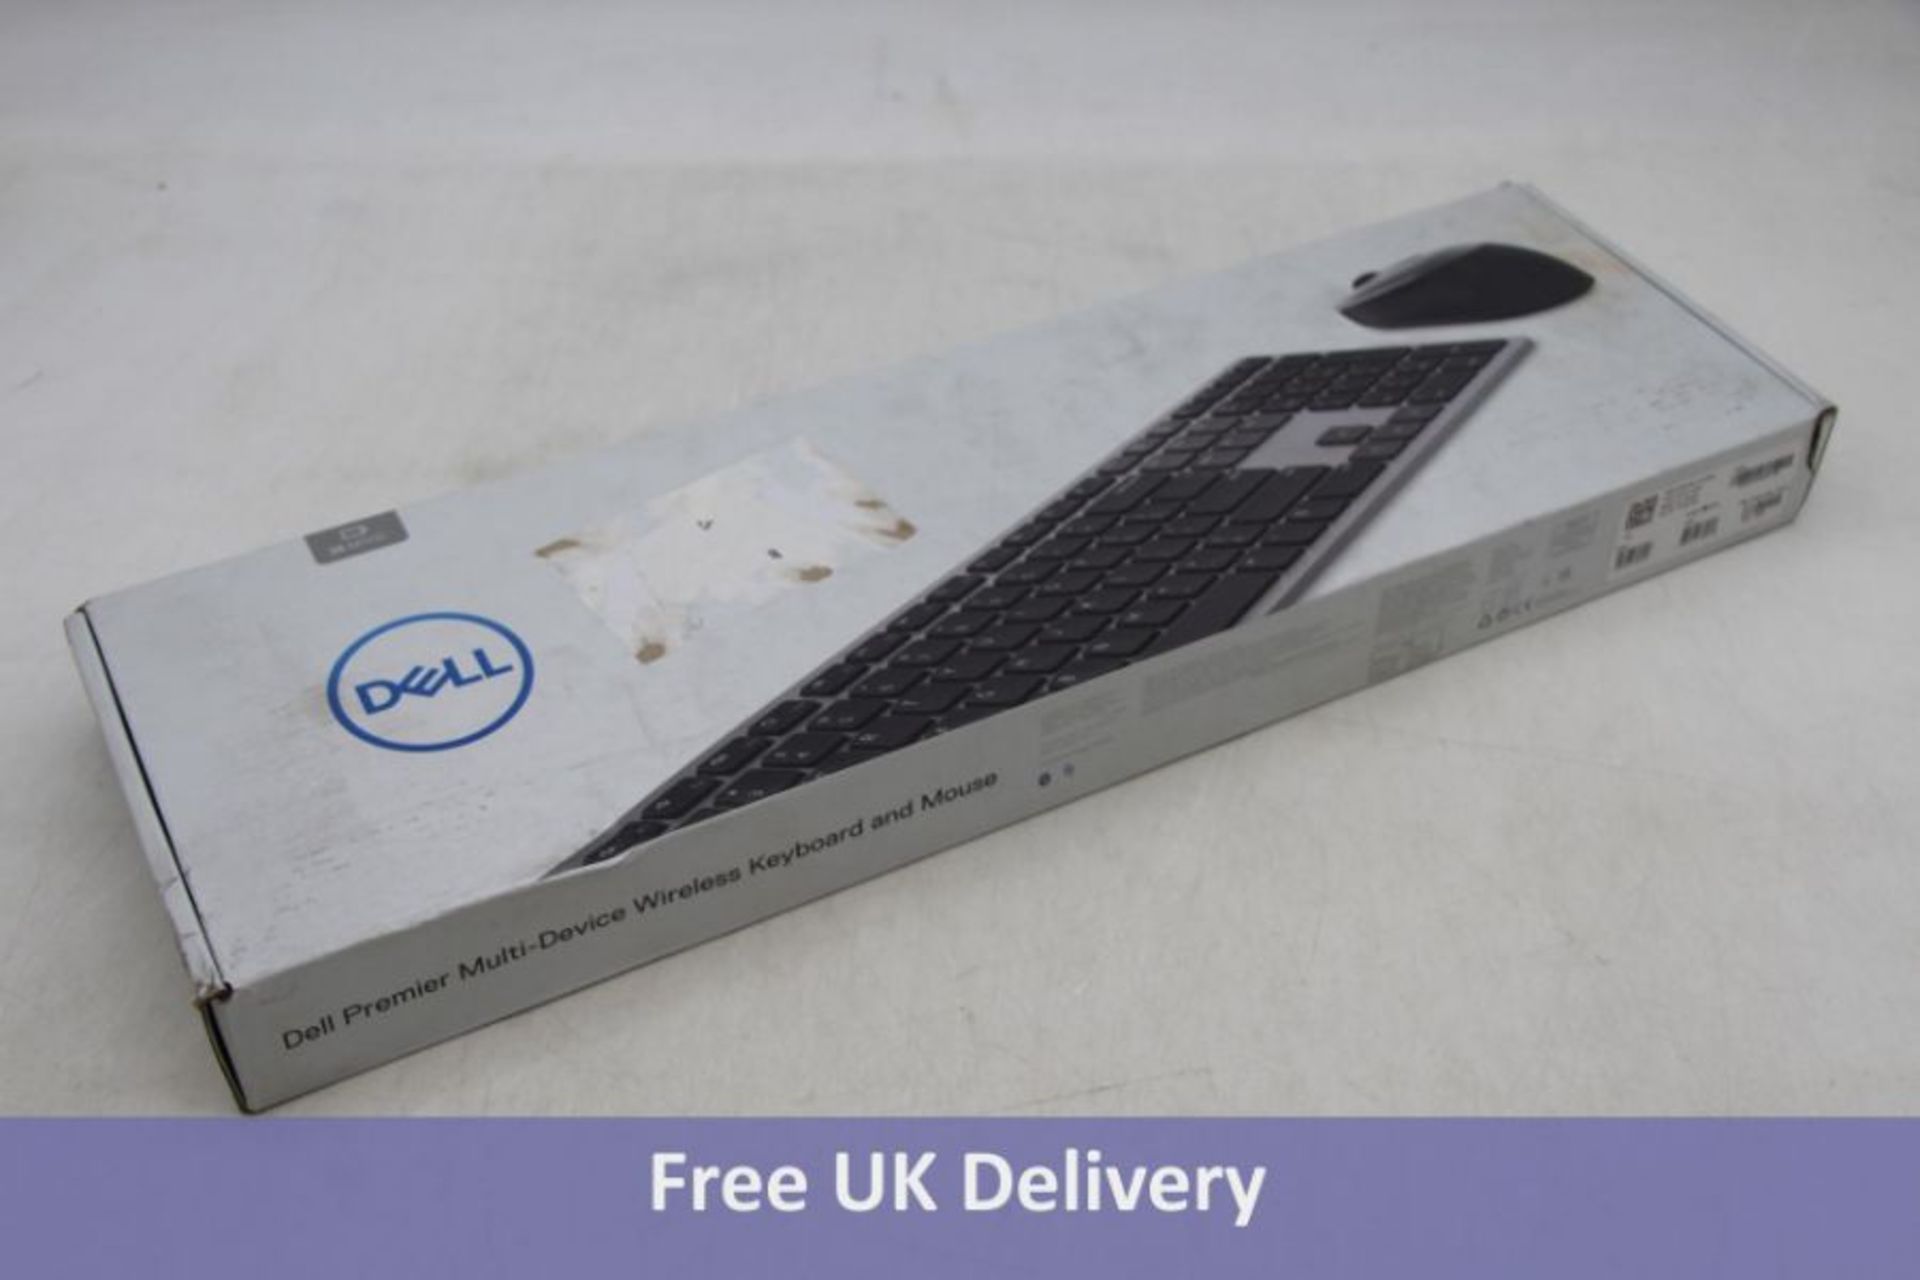 Dell Premier Multi-Device KM7321W Keyboard and Mouse Set